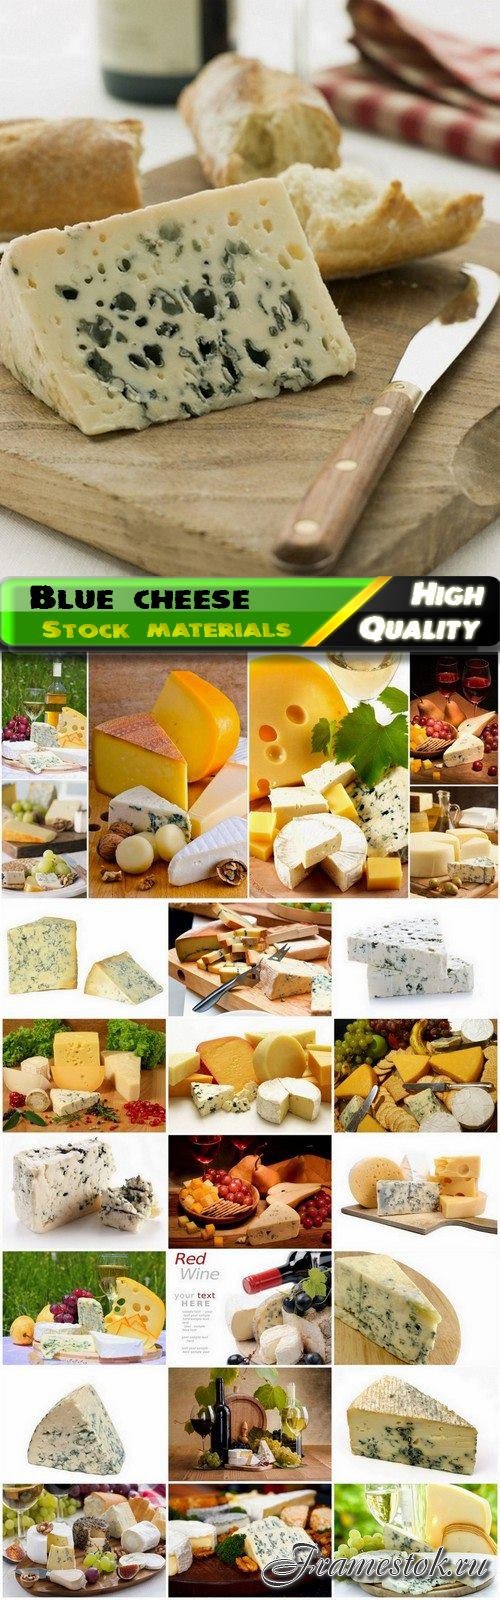 Dairy product blue cheese is delicacy gourmet food - 25 HQ Jpg